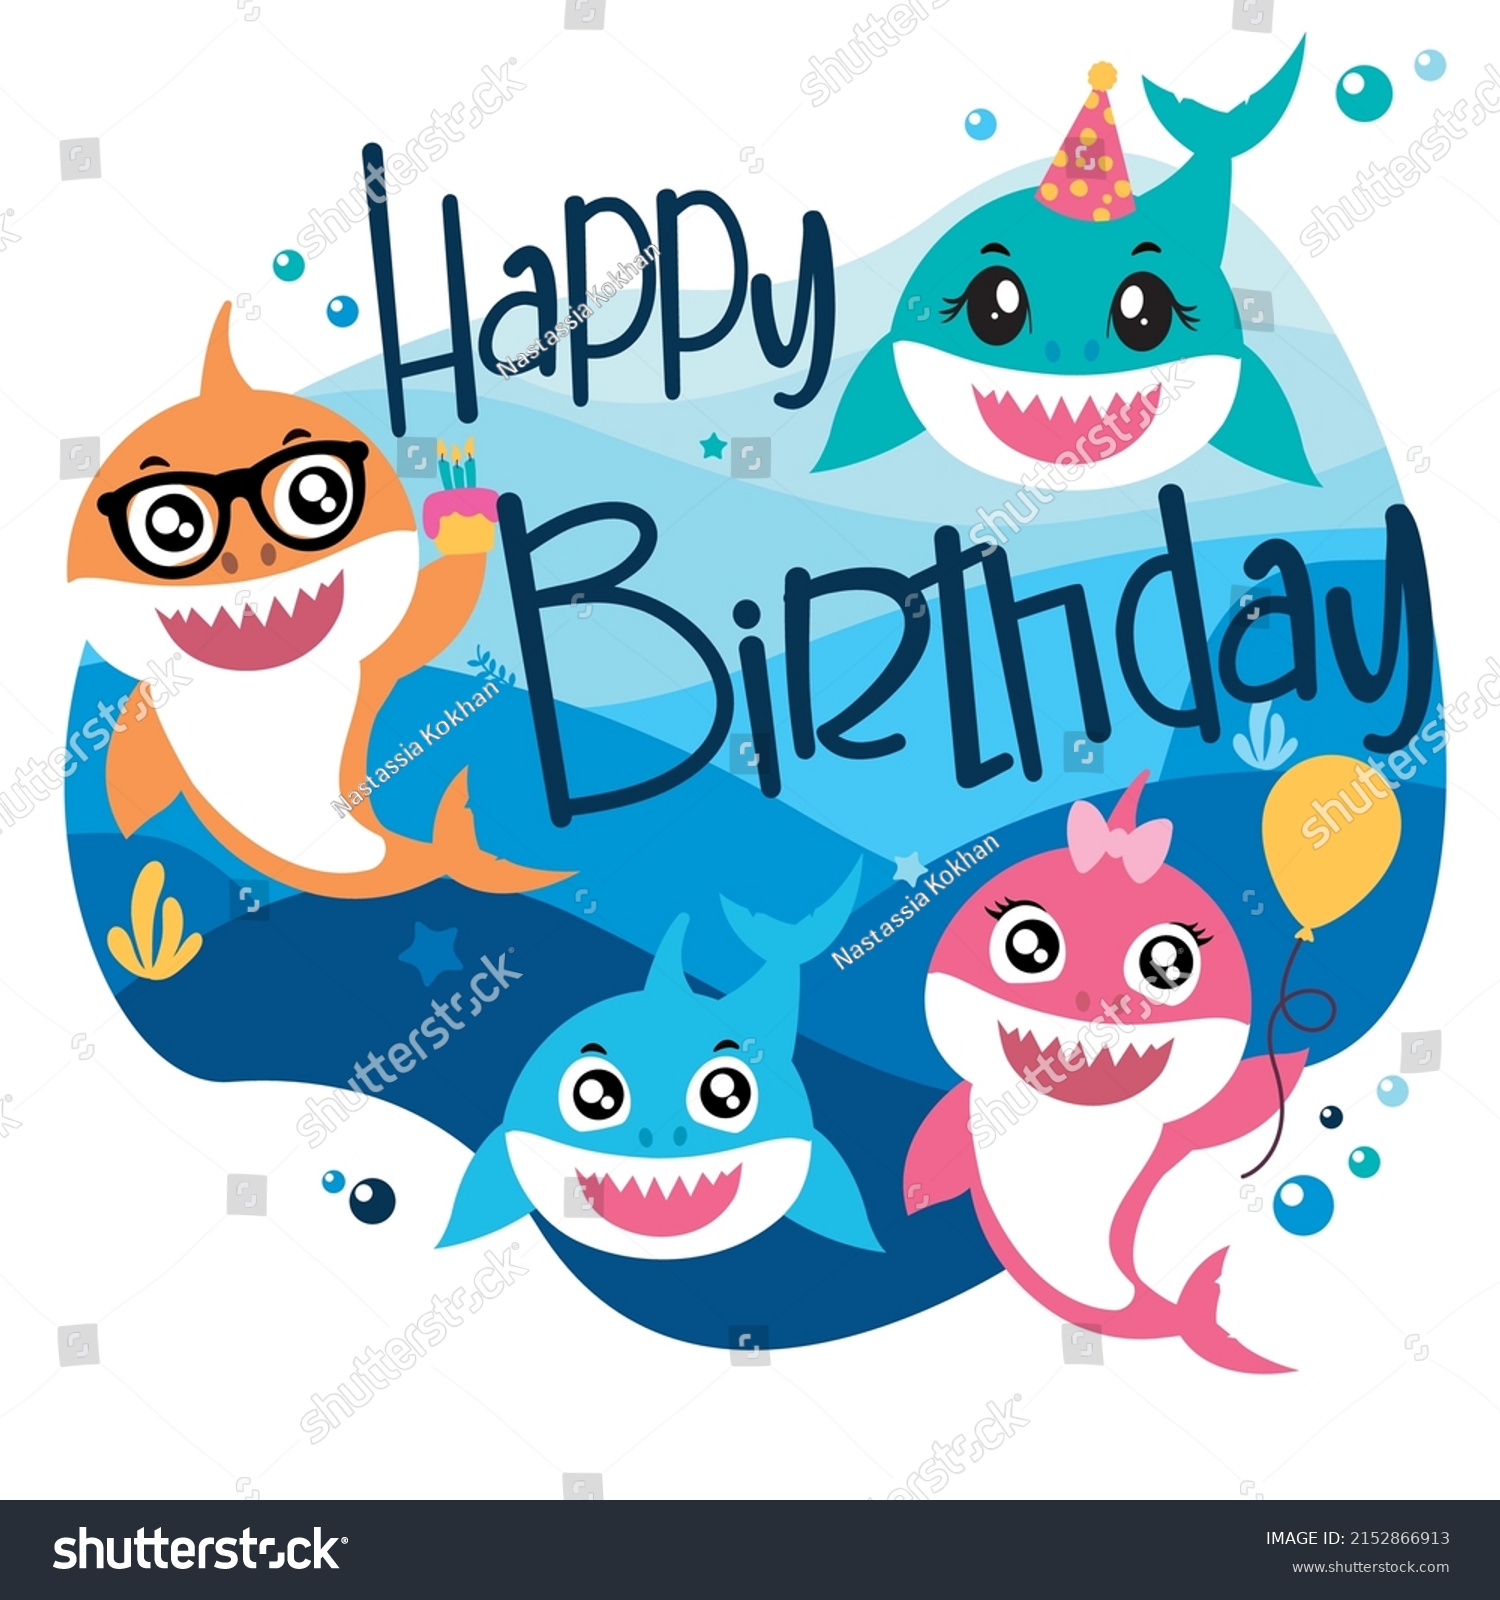 SVG of Birthday shark poster svg vector Illustration isolated on white background. Shark birthday party decor. Сard for birthday kids party svg